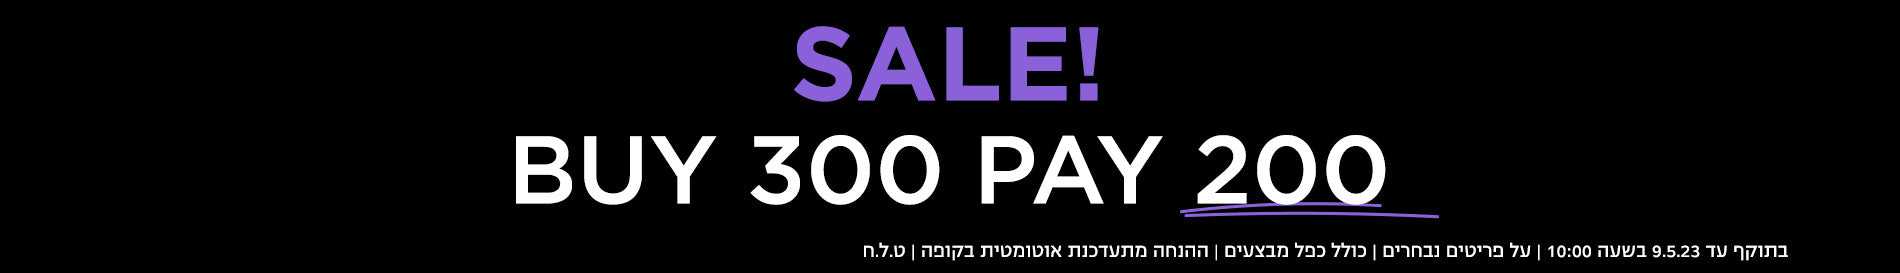 SALE - BUY 300 PAY 200